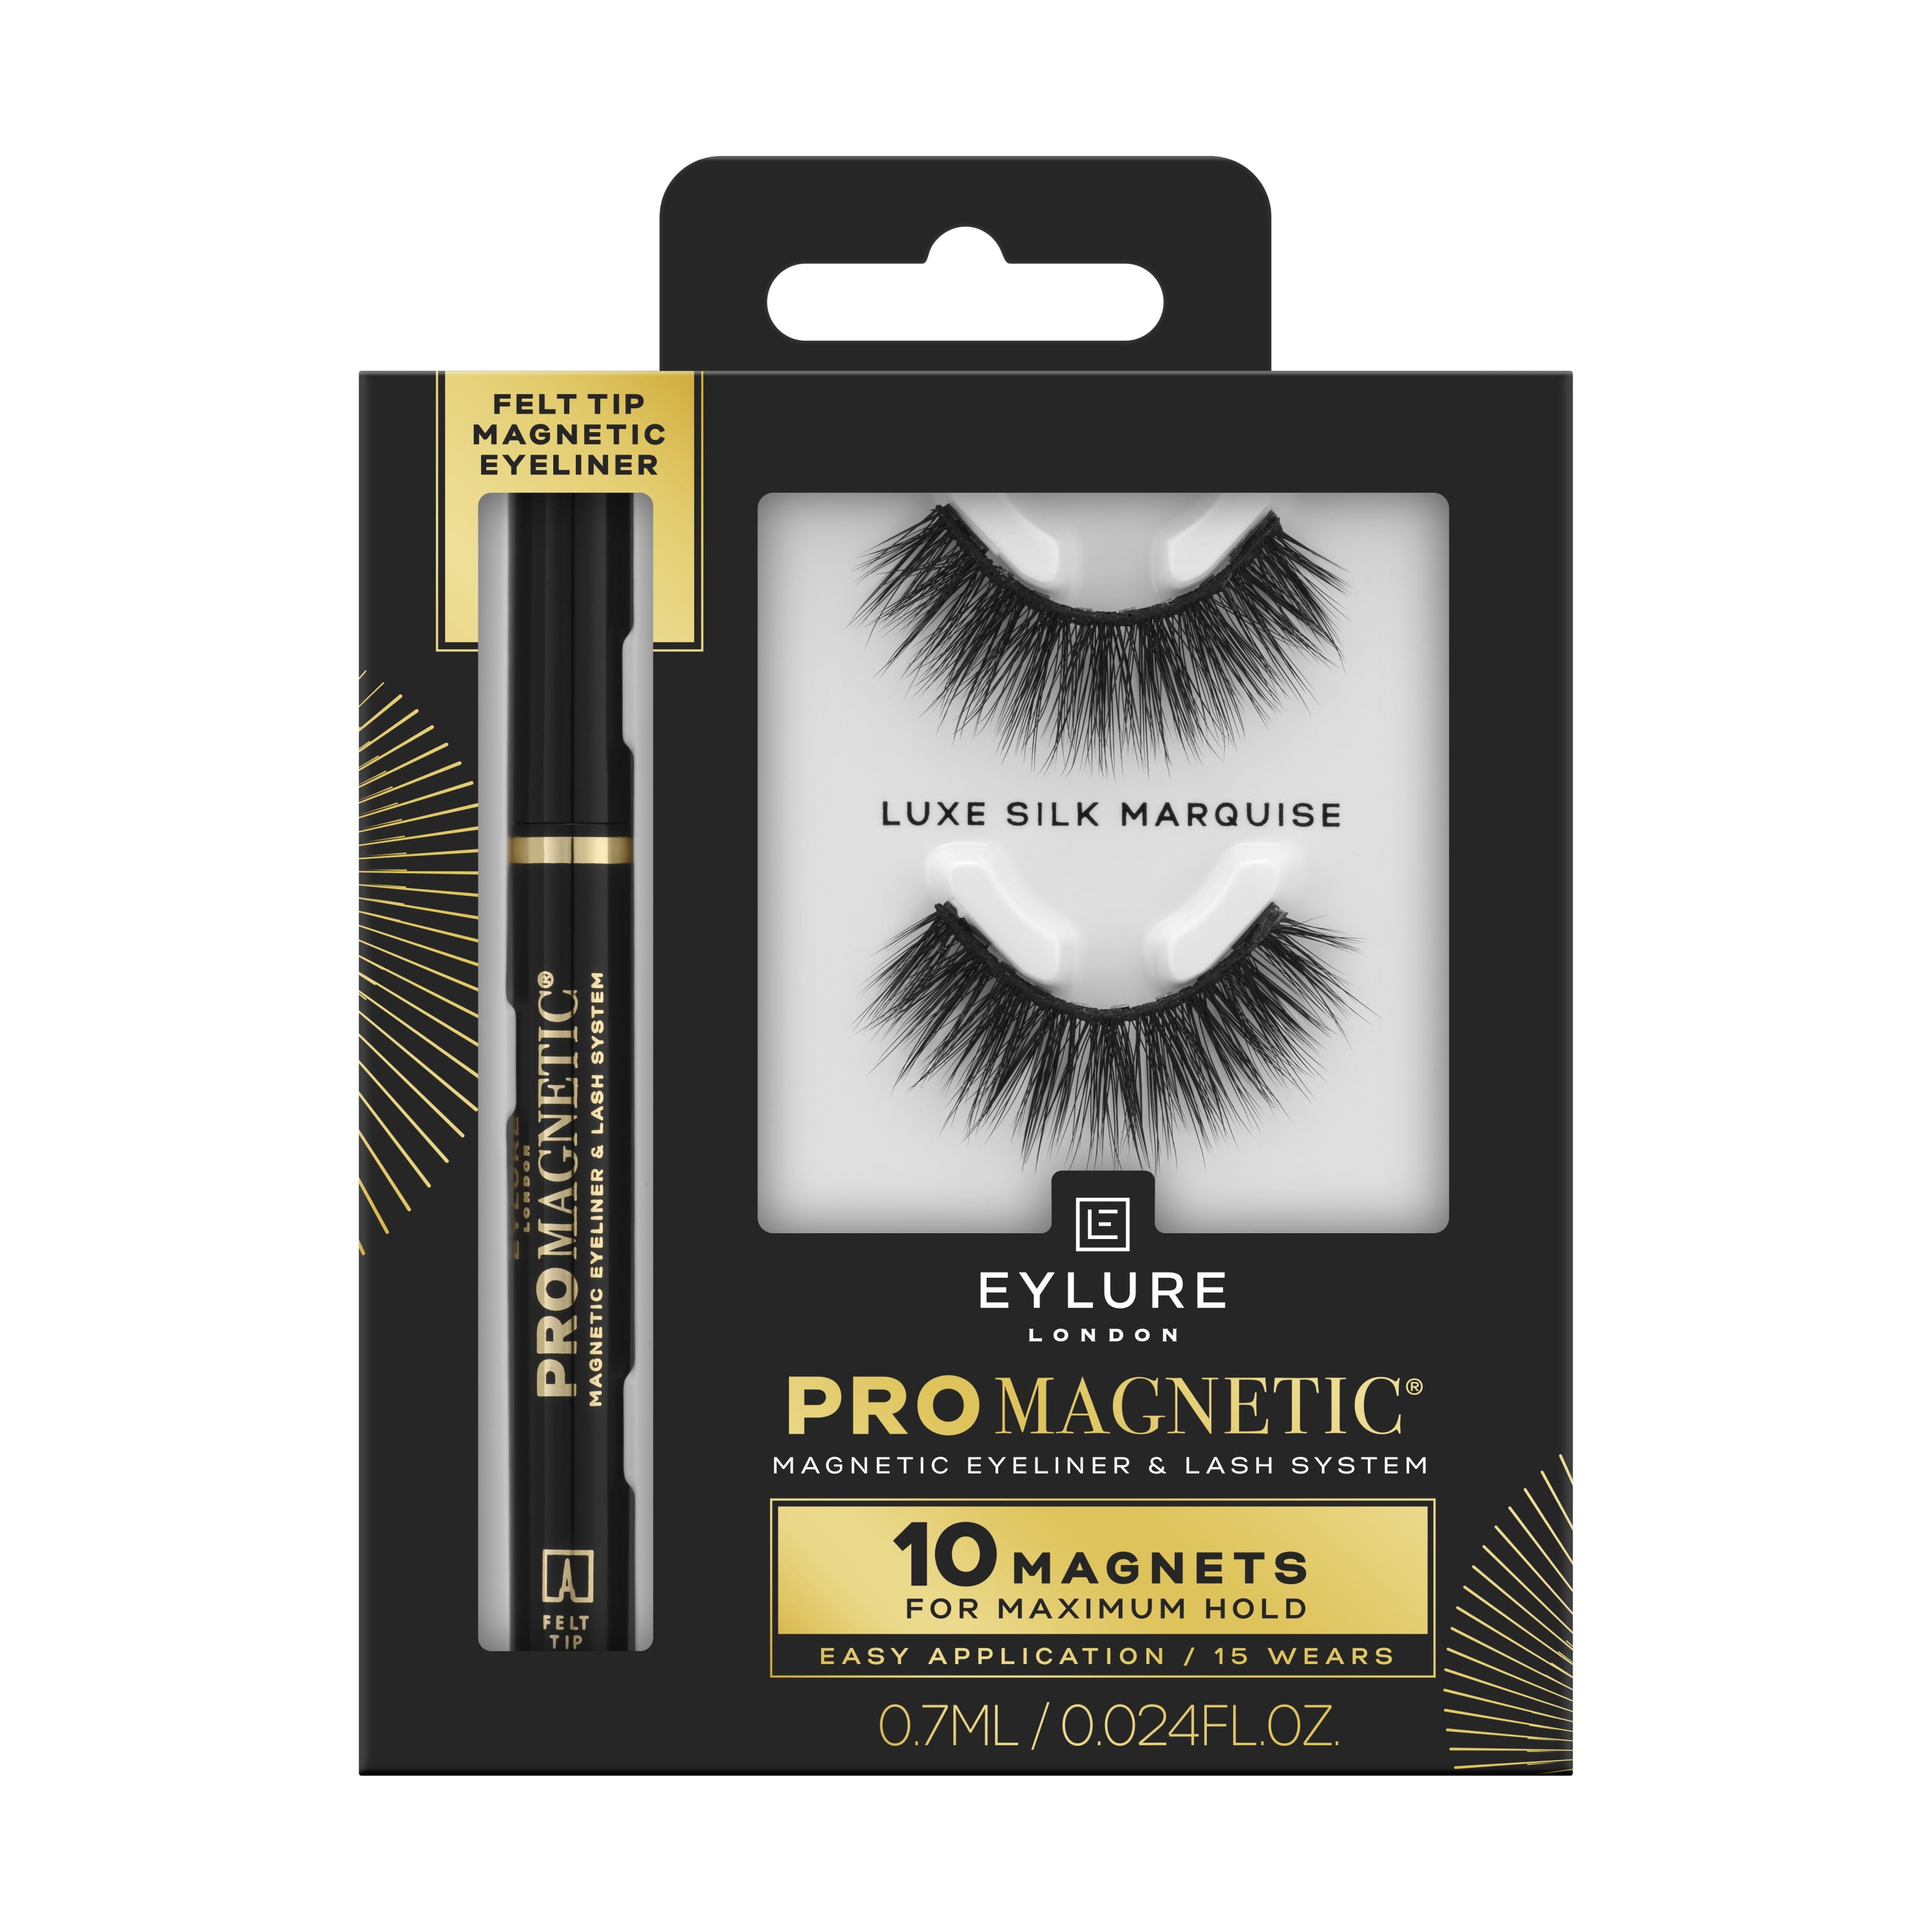 Eylure ProMagnetic 10 Magnet Lash Kit, Luxe Silk Marquise, No. 10